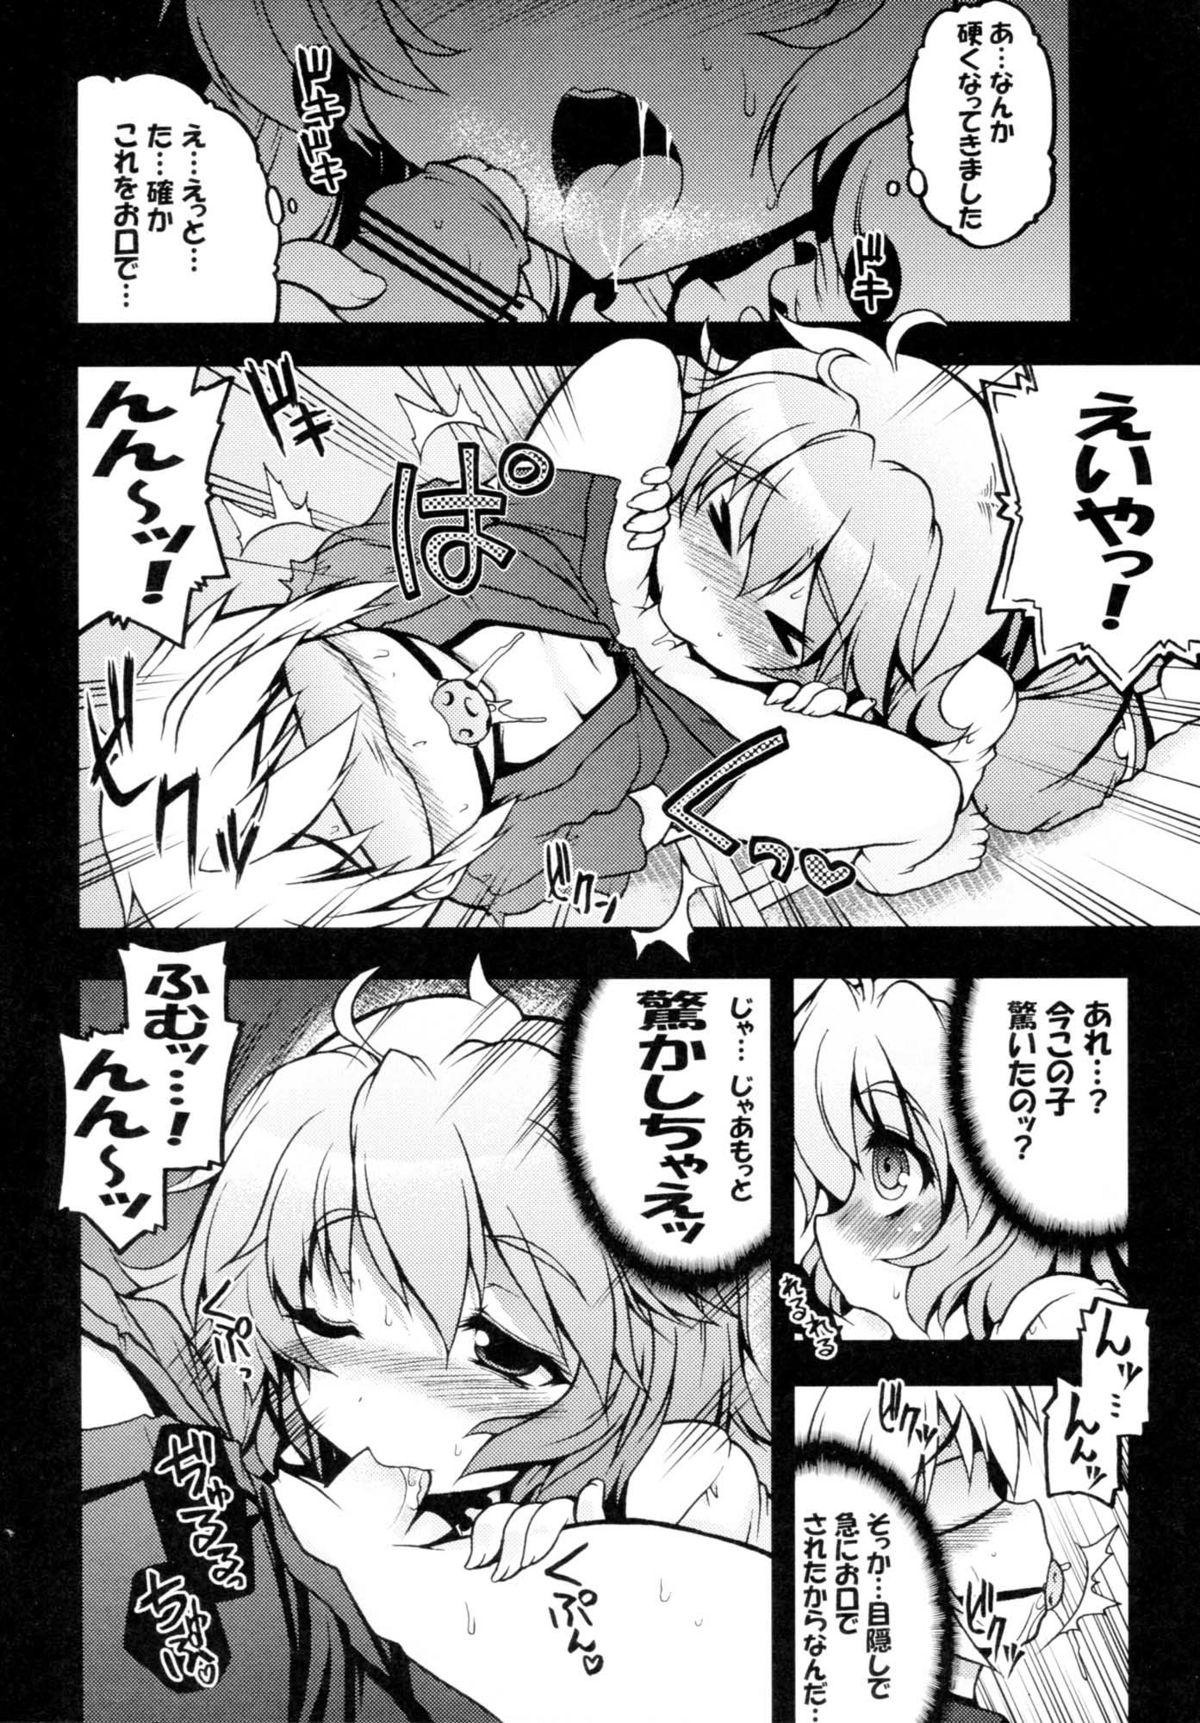 Stream Kogasa-chan Masochism - Touhou project Camshow - Page 6